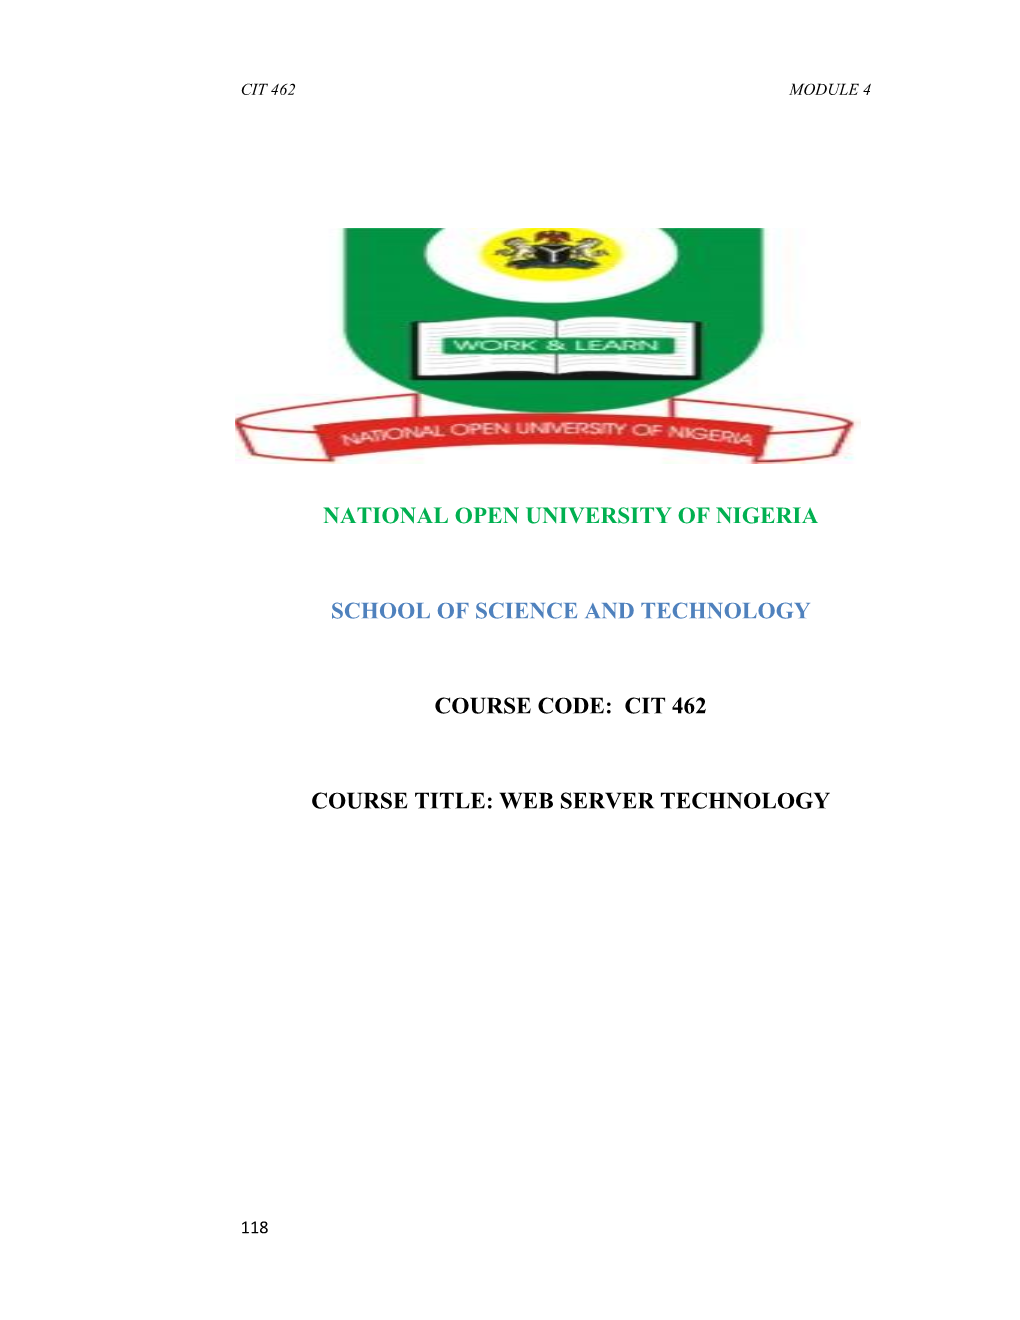 National Open University of Nigeria School of Science and Technology Course Code: Cit 462 Course Title: Web Server Technology